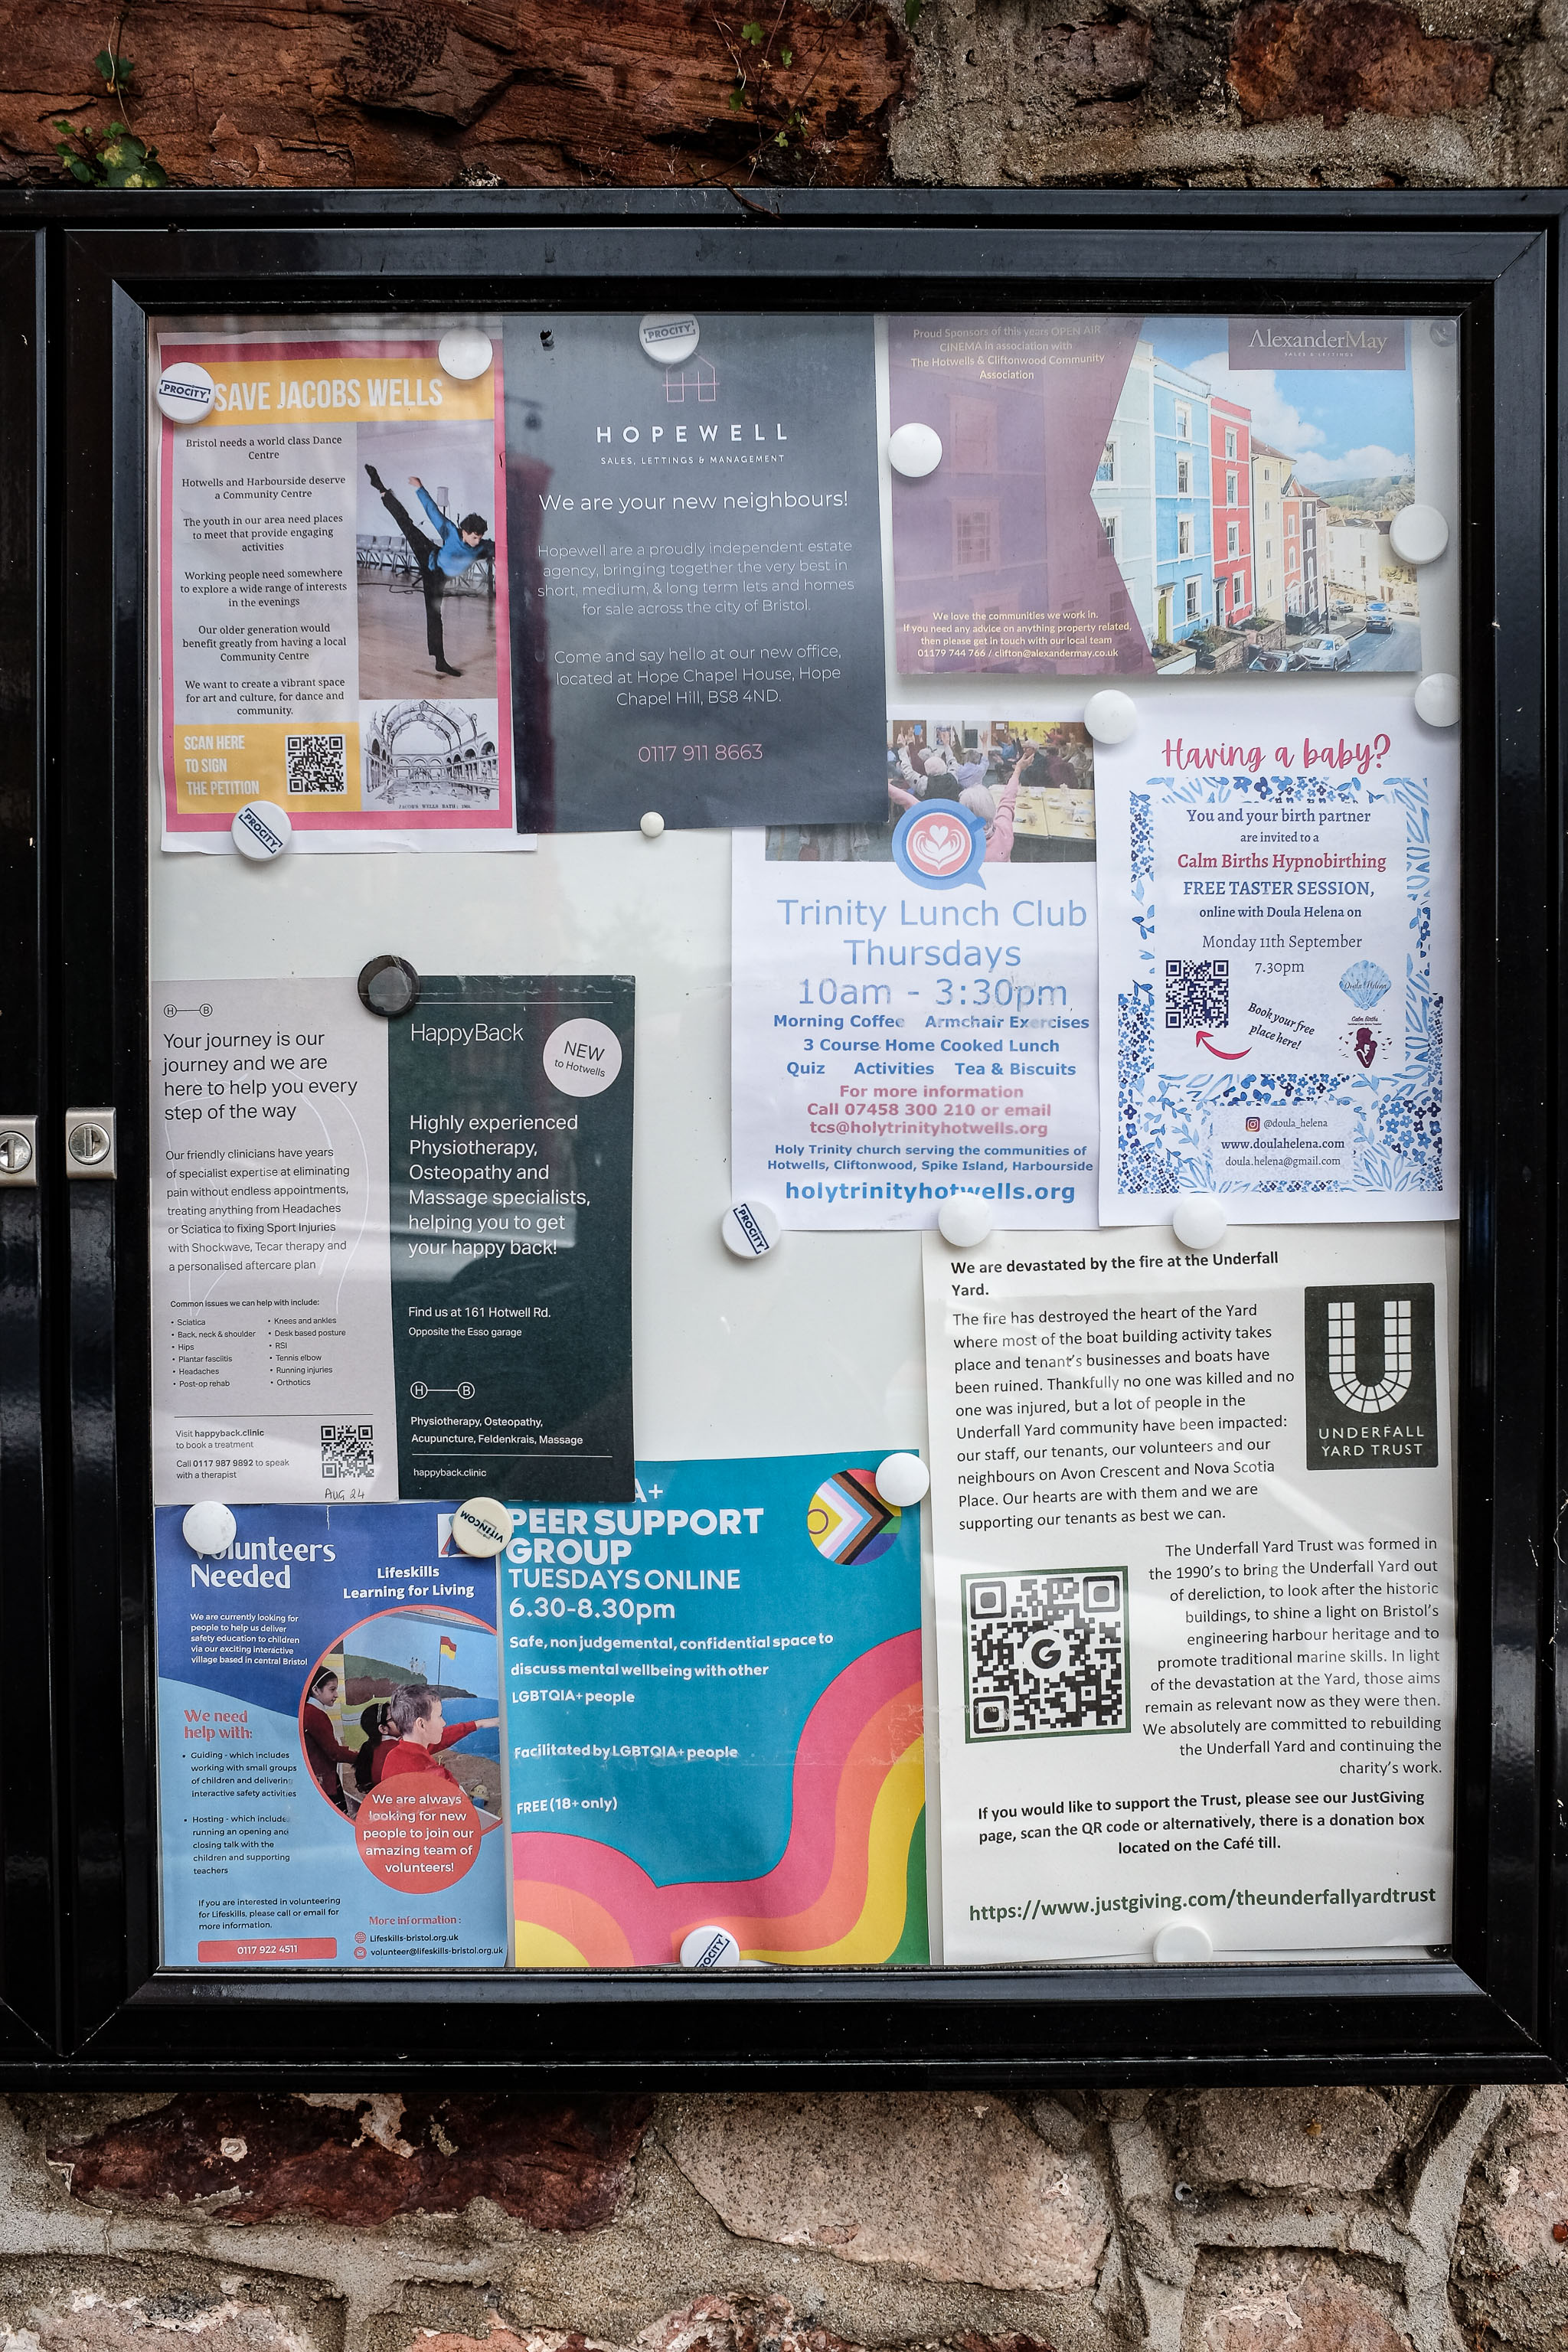 Board 2
More notices, including a couple of newcomers to the local businesses: Hopewell, an estate agency, has opened up just down Hopechapel Hill in the p...